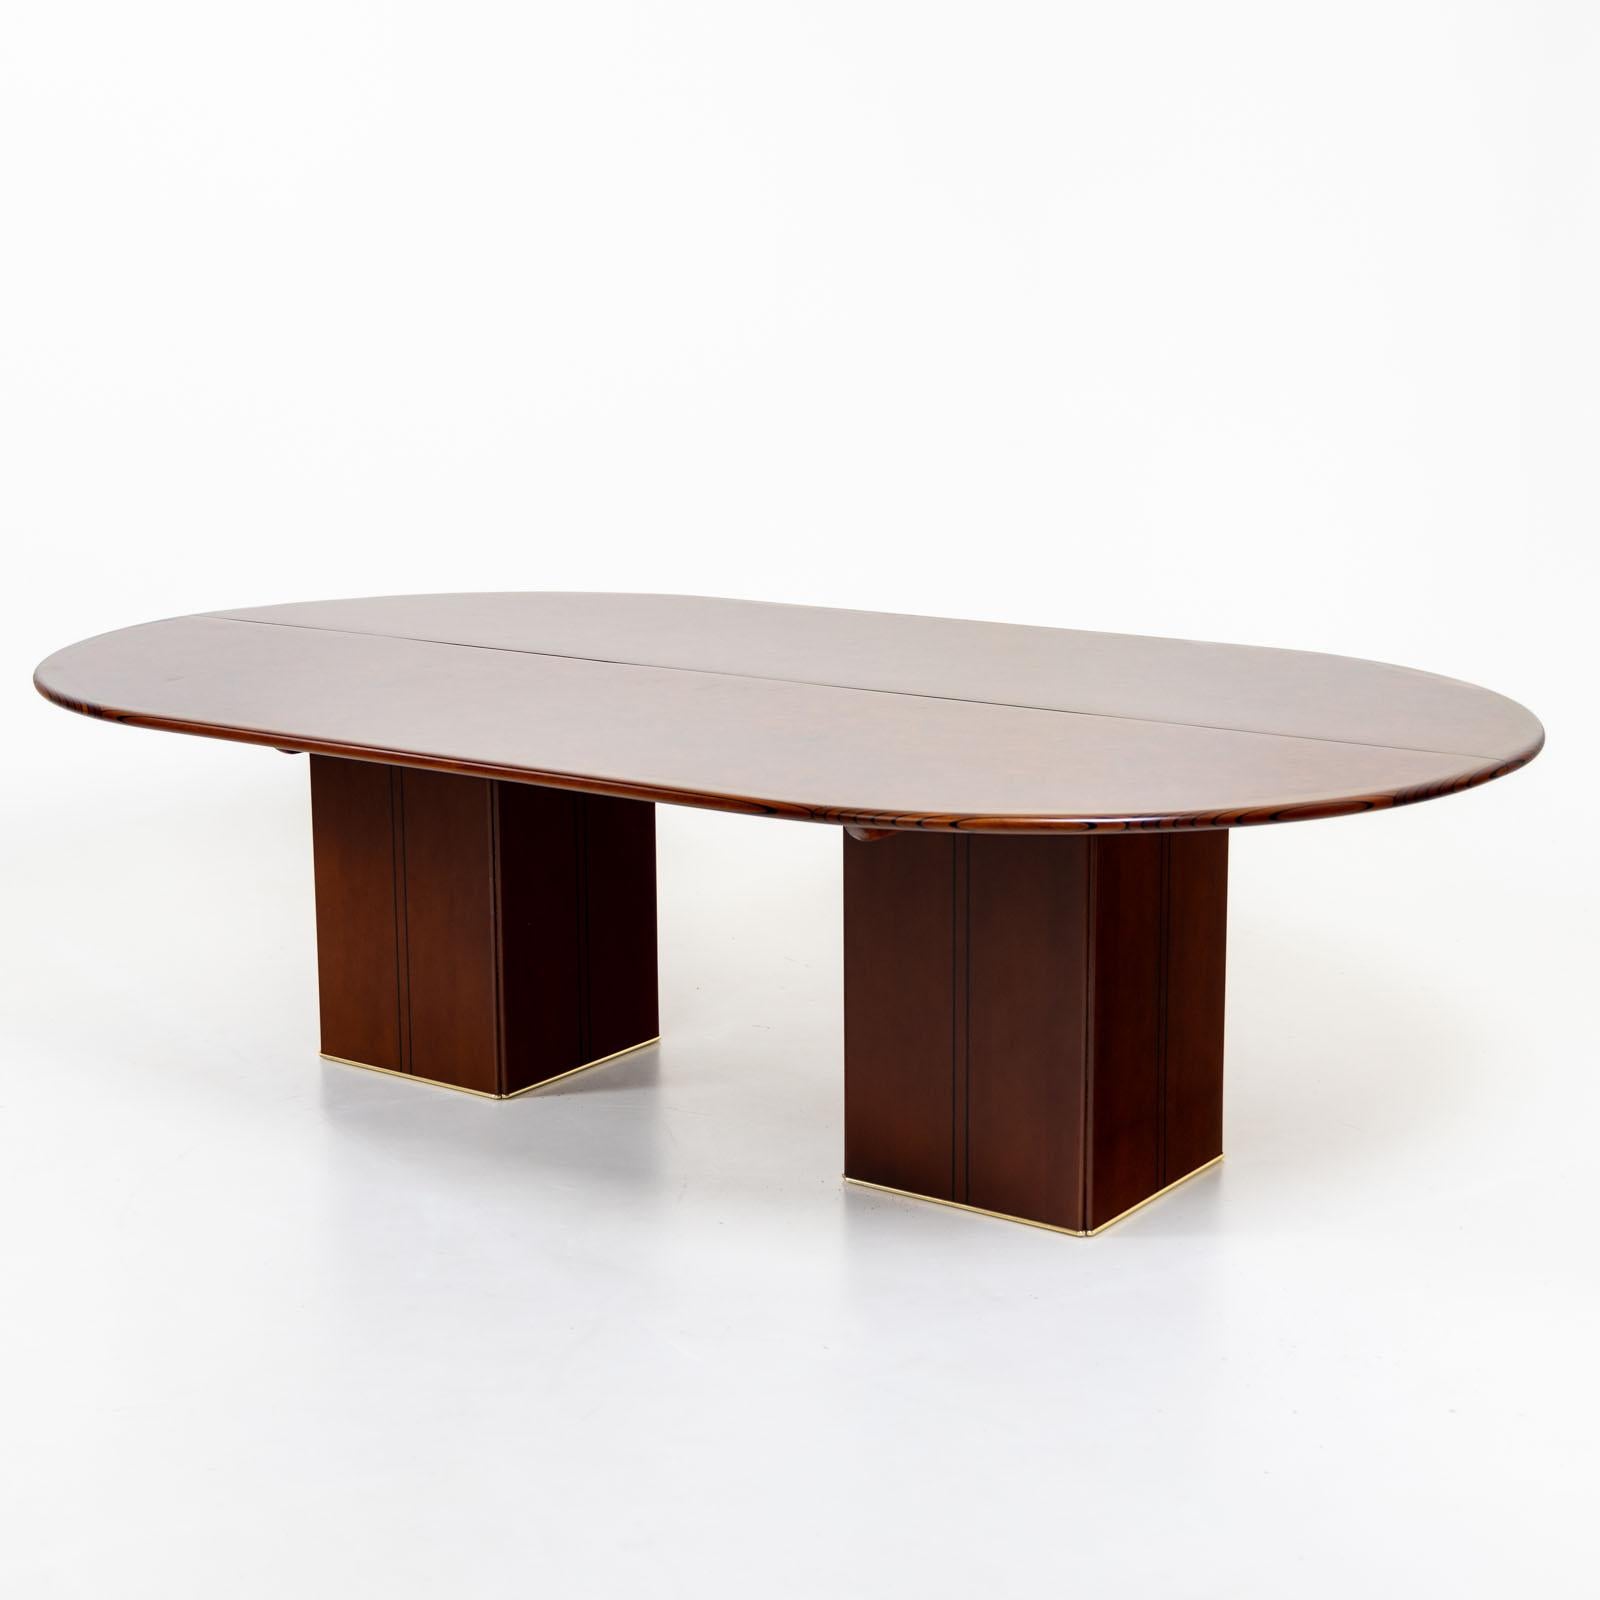 Large dining table or conference table with oval tabletop and veneer of walnut and birch burl. The table rests on two square legs, which are stabilized by means of concrete counterweights. The weights are embossed with the logo of Maxalto as well as